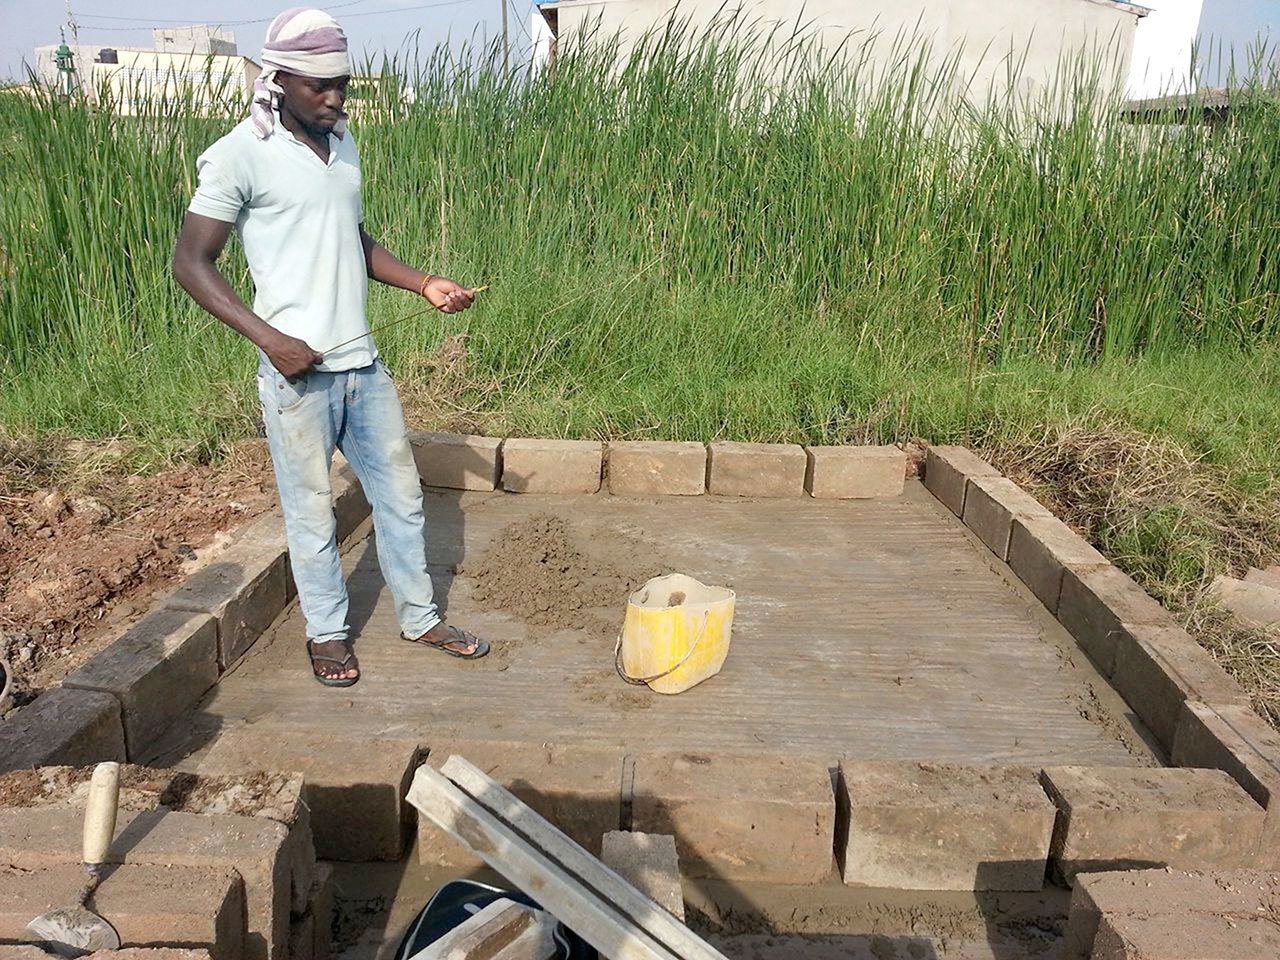 An unidentified man works on a compost toilet for a family living in the village of Zogbedgi, Togo, as part of the Dignity Toilets for Togo program. (Bedi Taouvik Boukari)